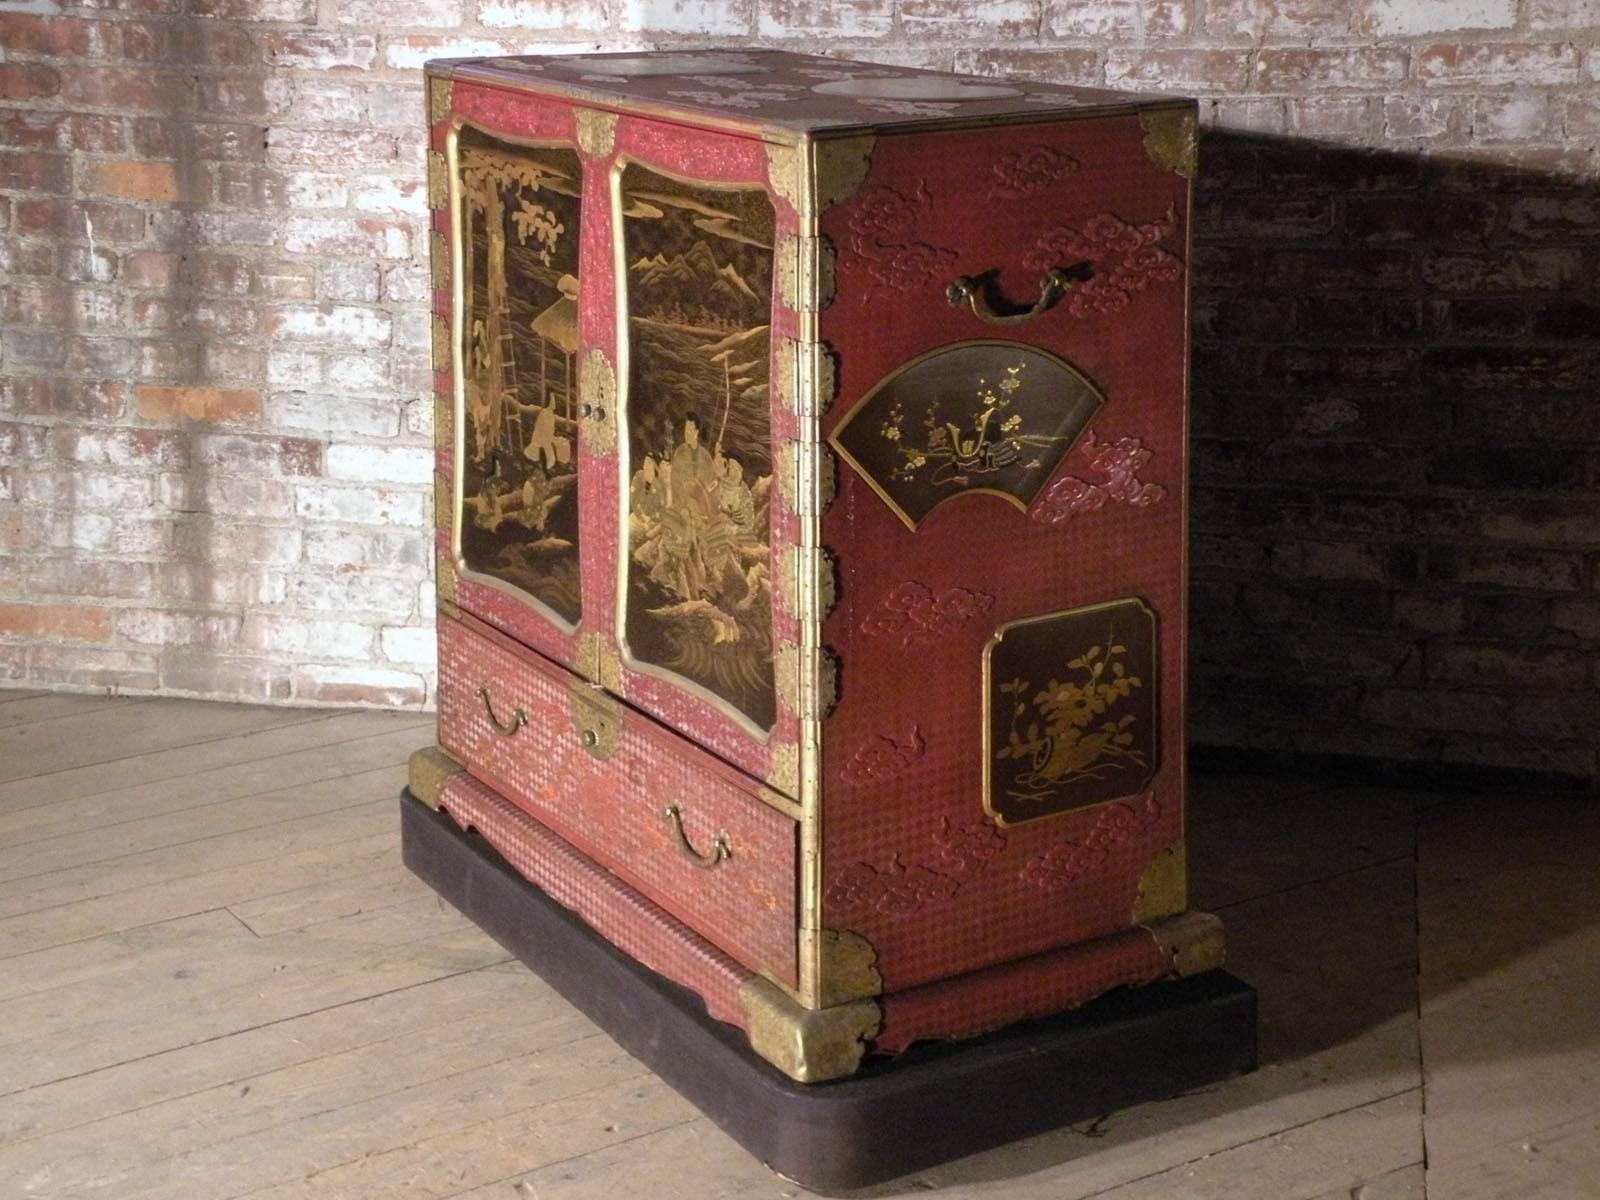 Exceptionally large and rare lacquer cabinet. According to the heraldry, visible on the headgear in one of the panels, it was made for the Inaba family, a high ranking Daimyo family, native of Mino and descended from Kono Michitaka. The extensive